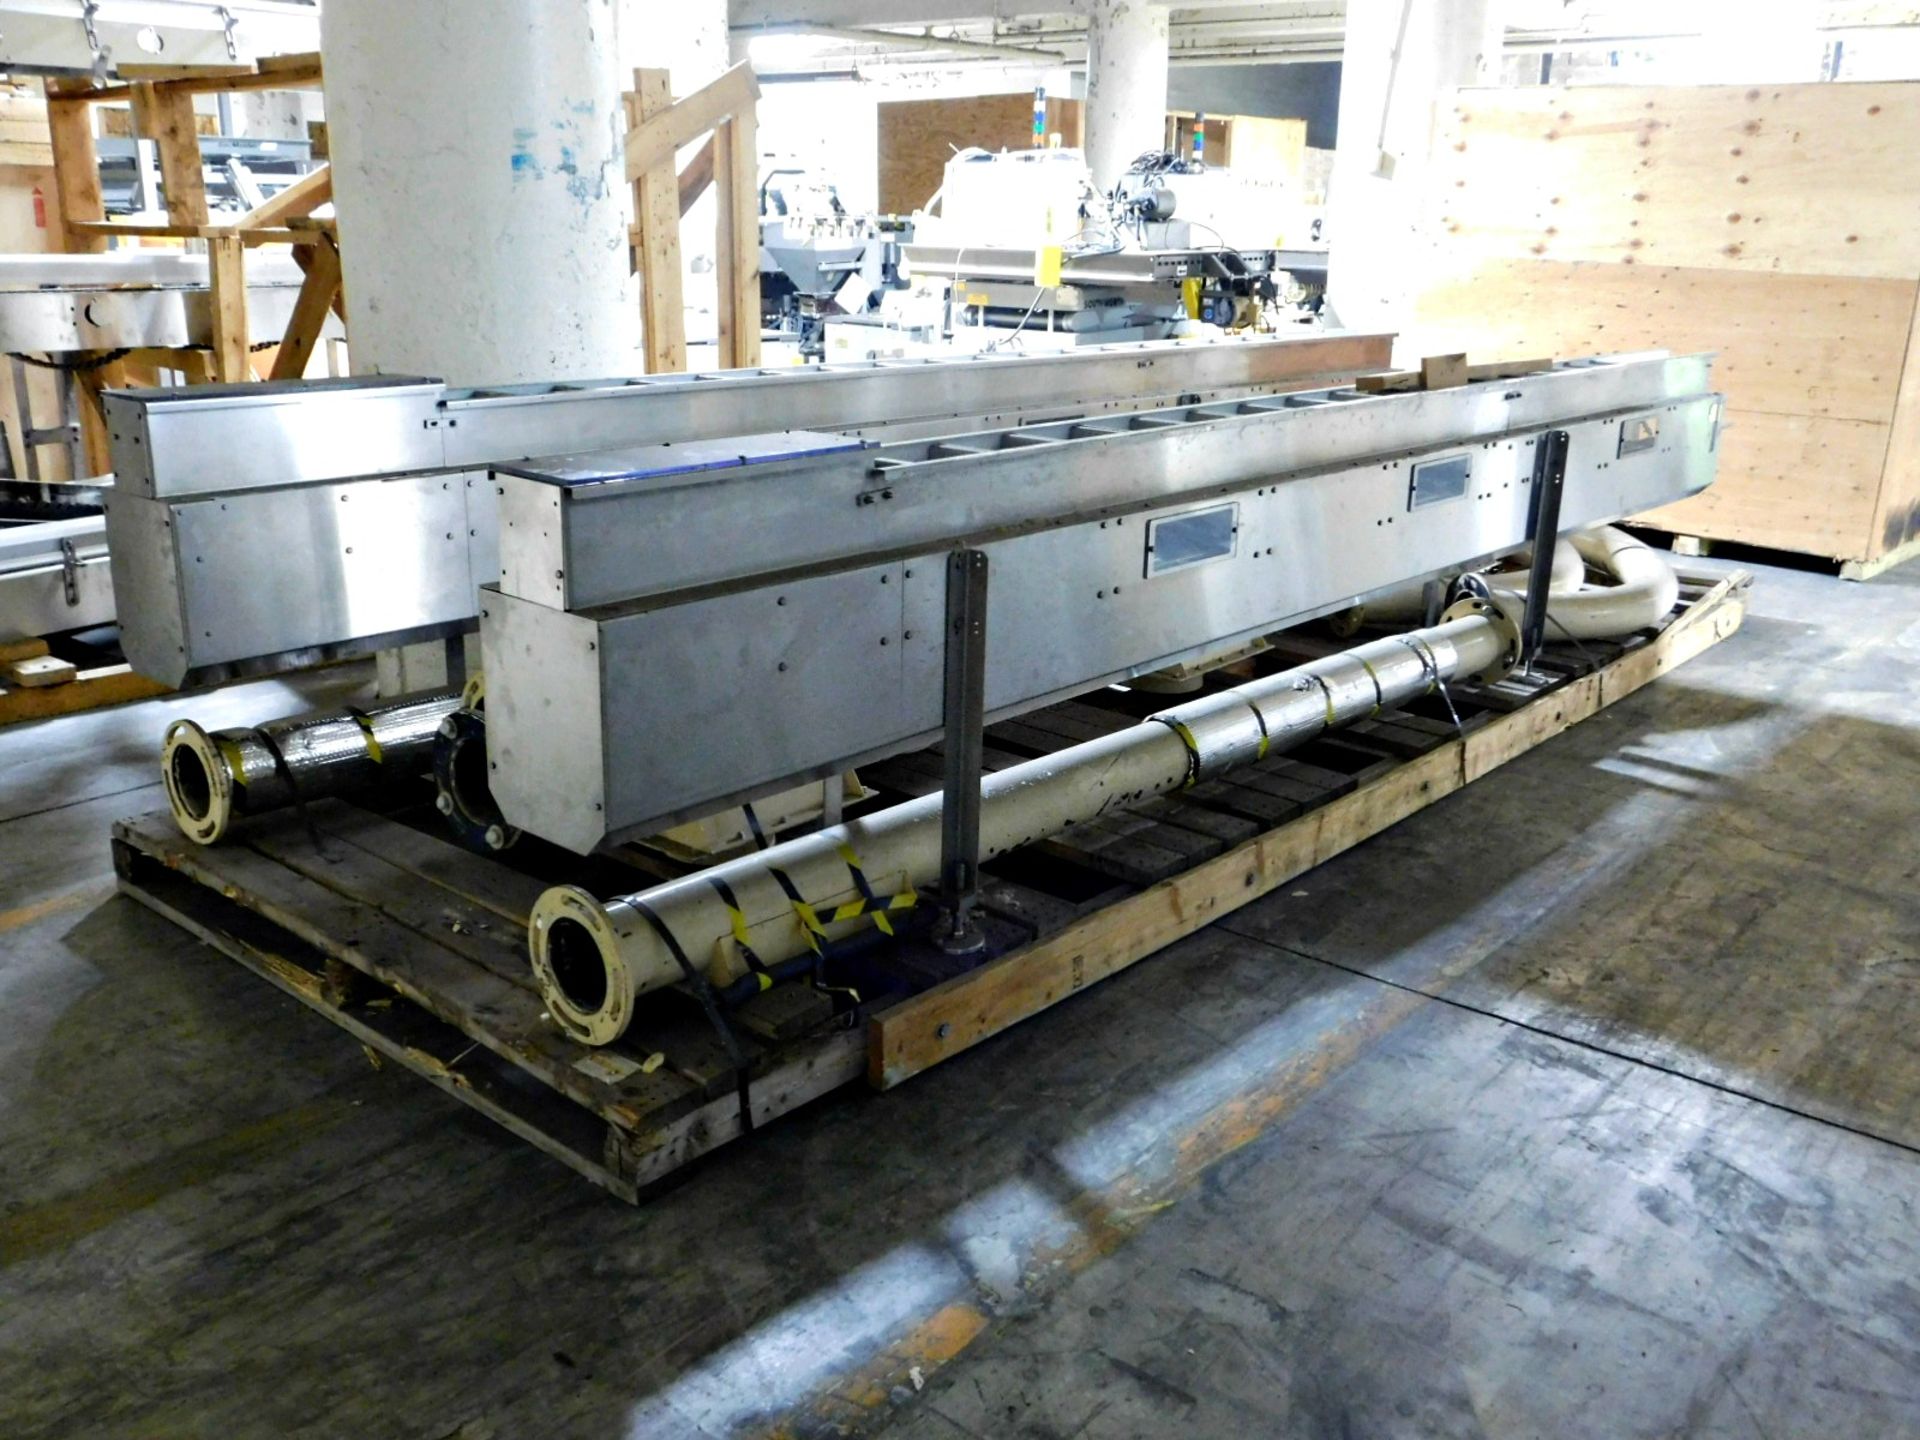 Stainless steel conveyor 17' 2" x 5" qty 2 & pipes :equipment located at Clark Logistic Services |